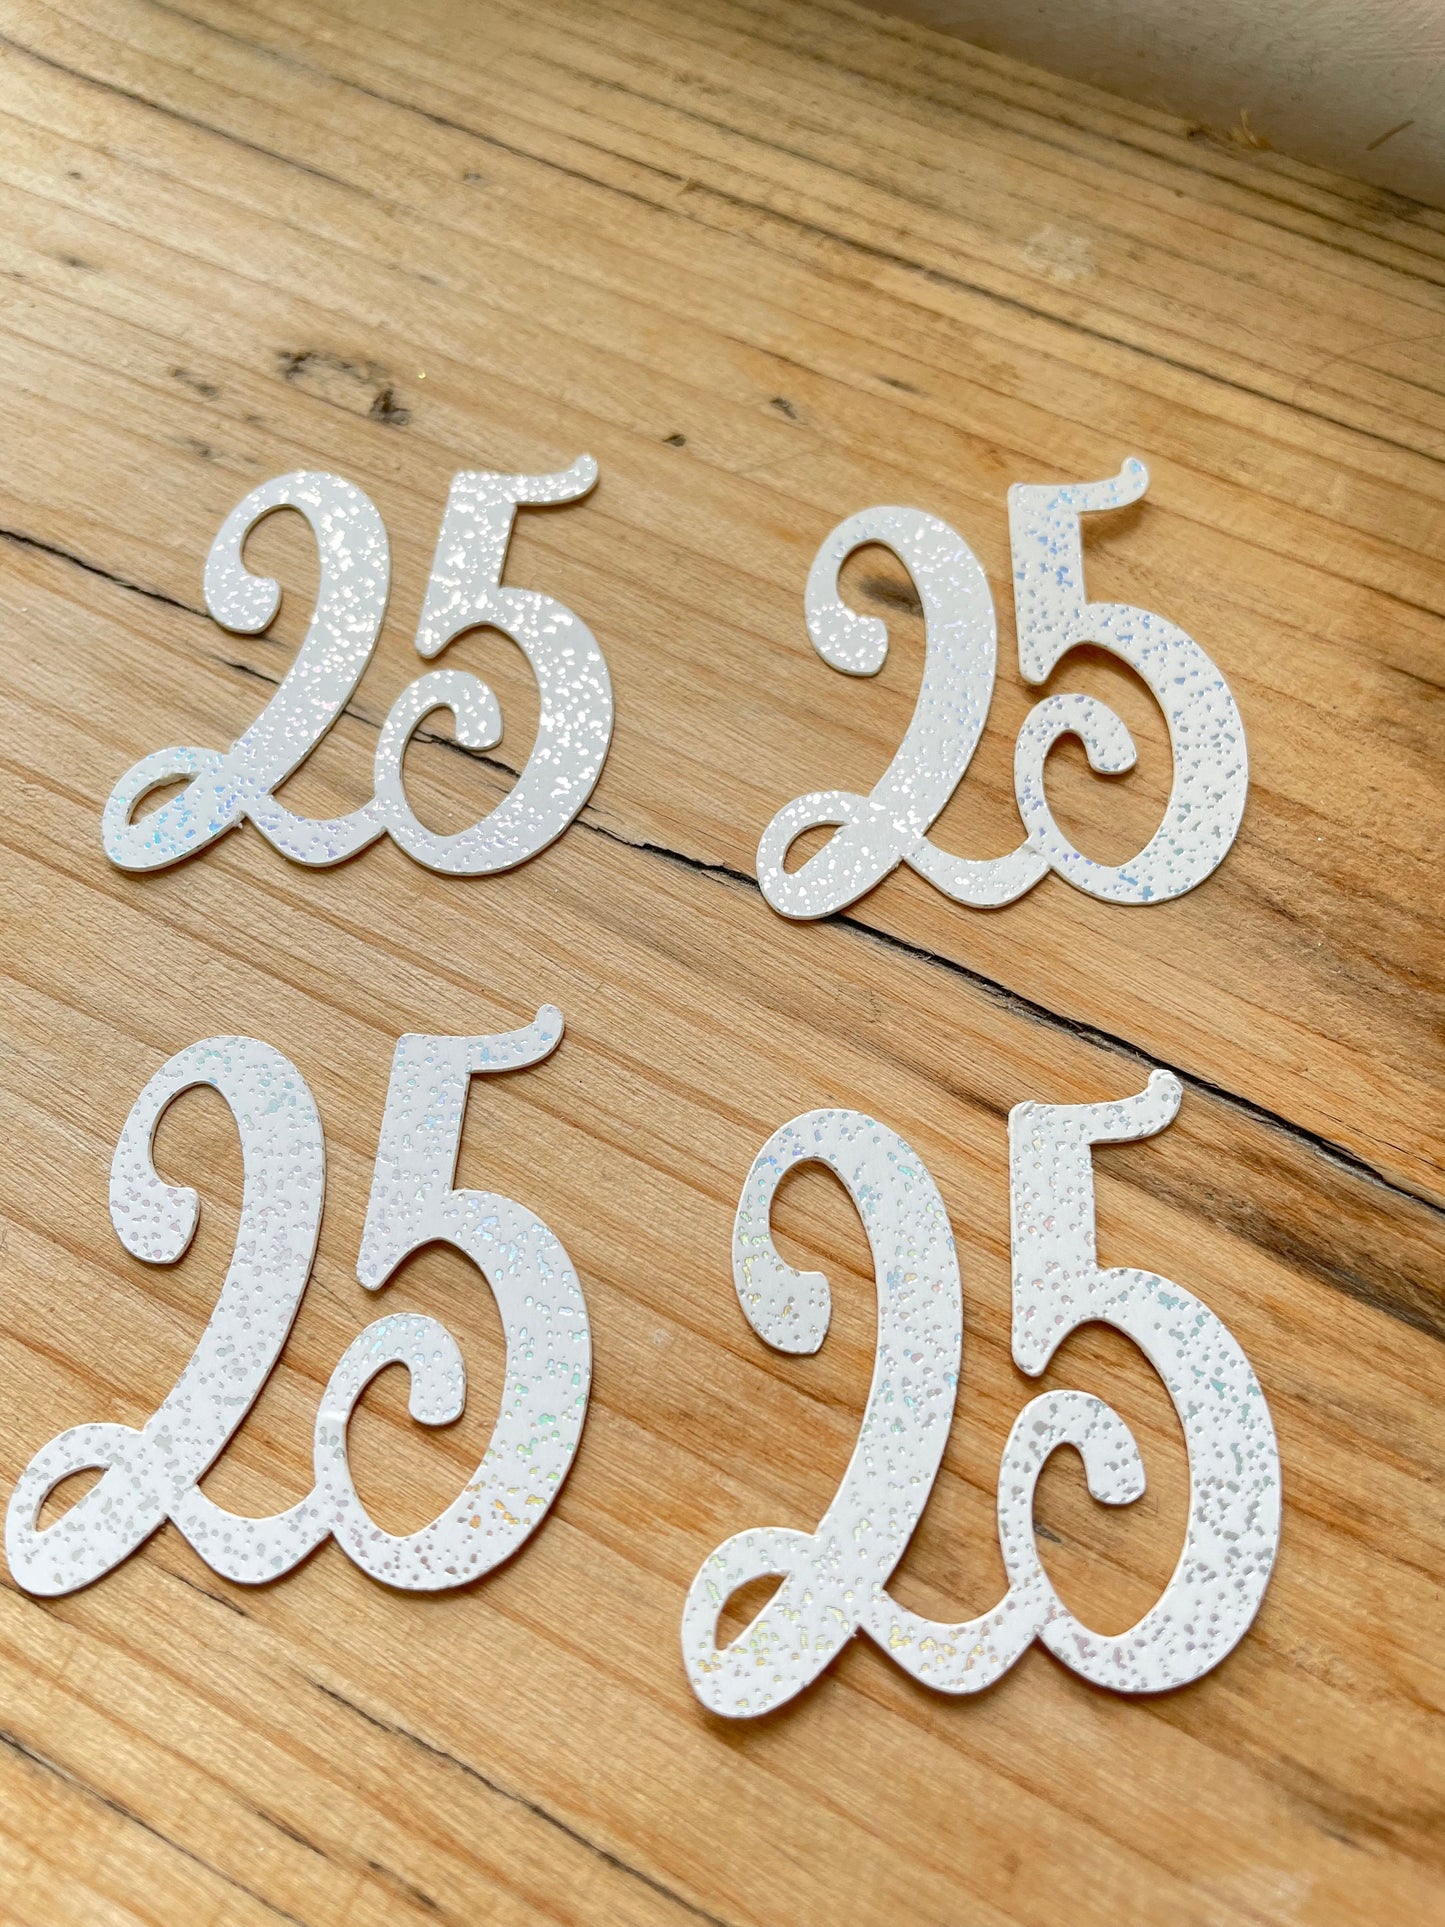 Happy Birthday Cupcake Toppers, Set of 4 or 6 Small Celebration Cake Number Picks, Choose Any Age Cupcake Charms, 18th, 21st, 30th, 40th